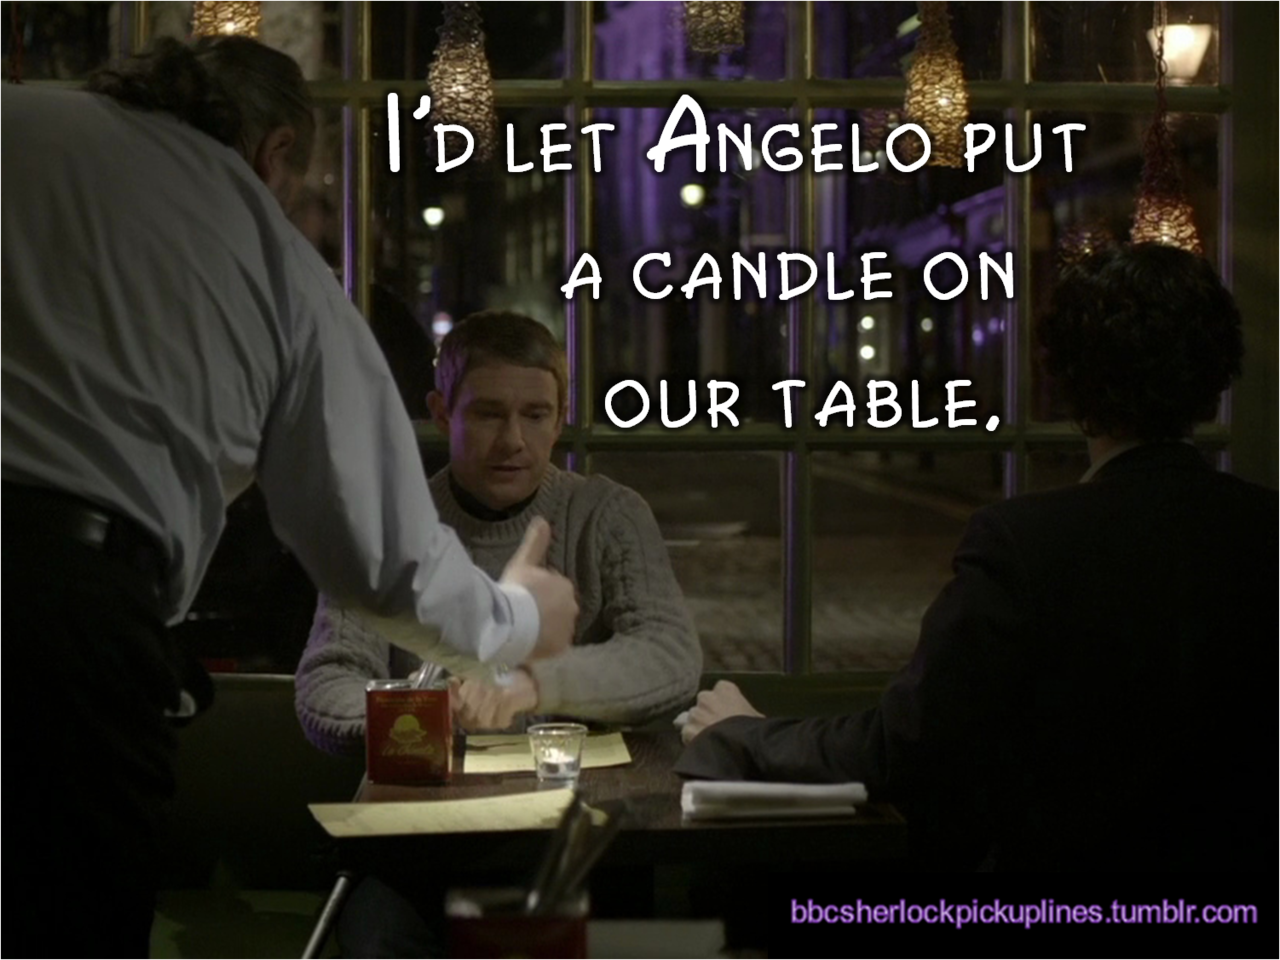 &ldquo;I&rsquo;d let Angelo put a candle on our table.&rdquo;